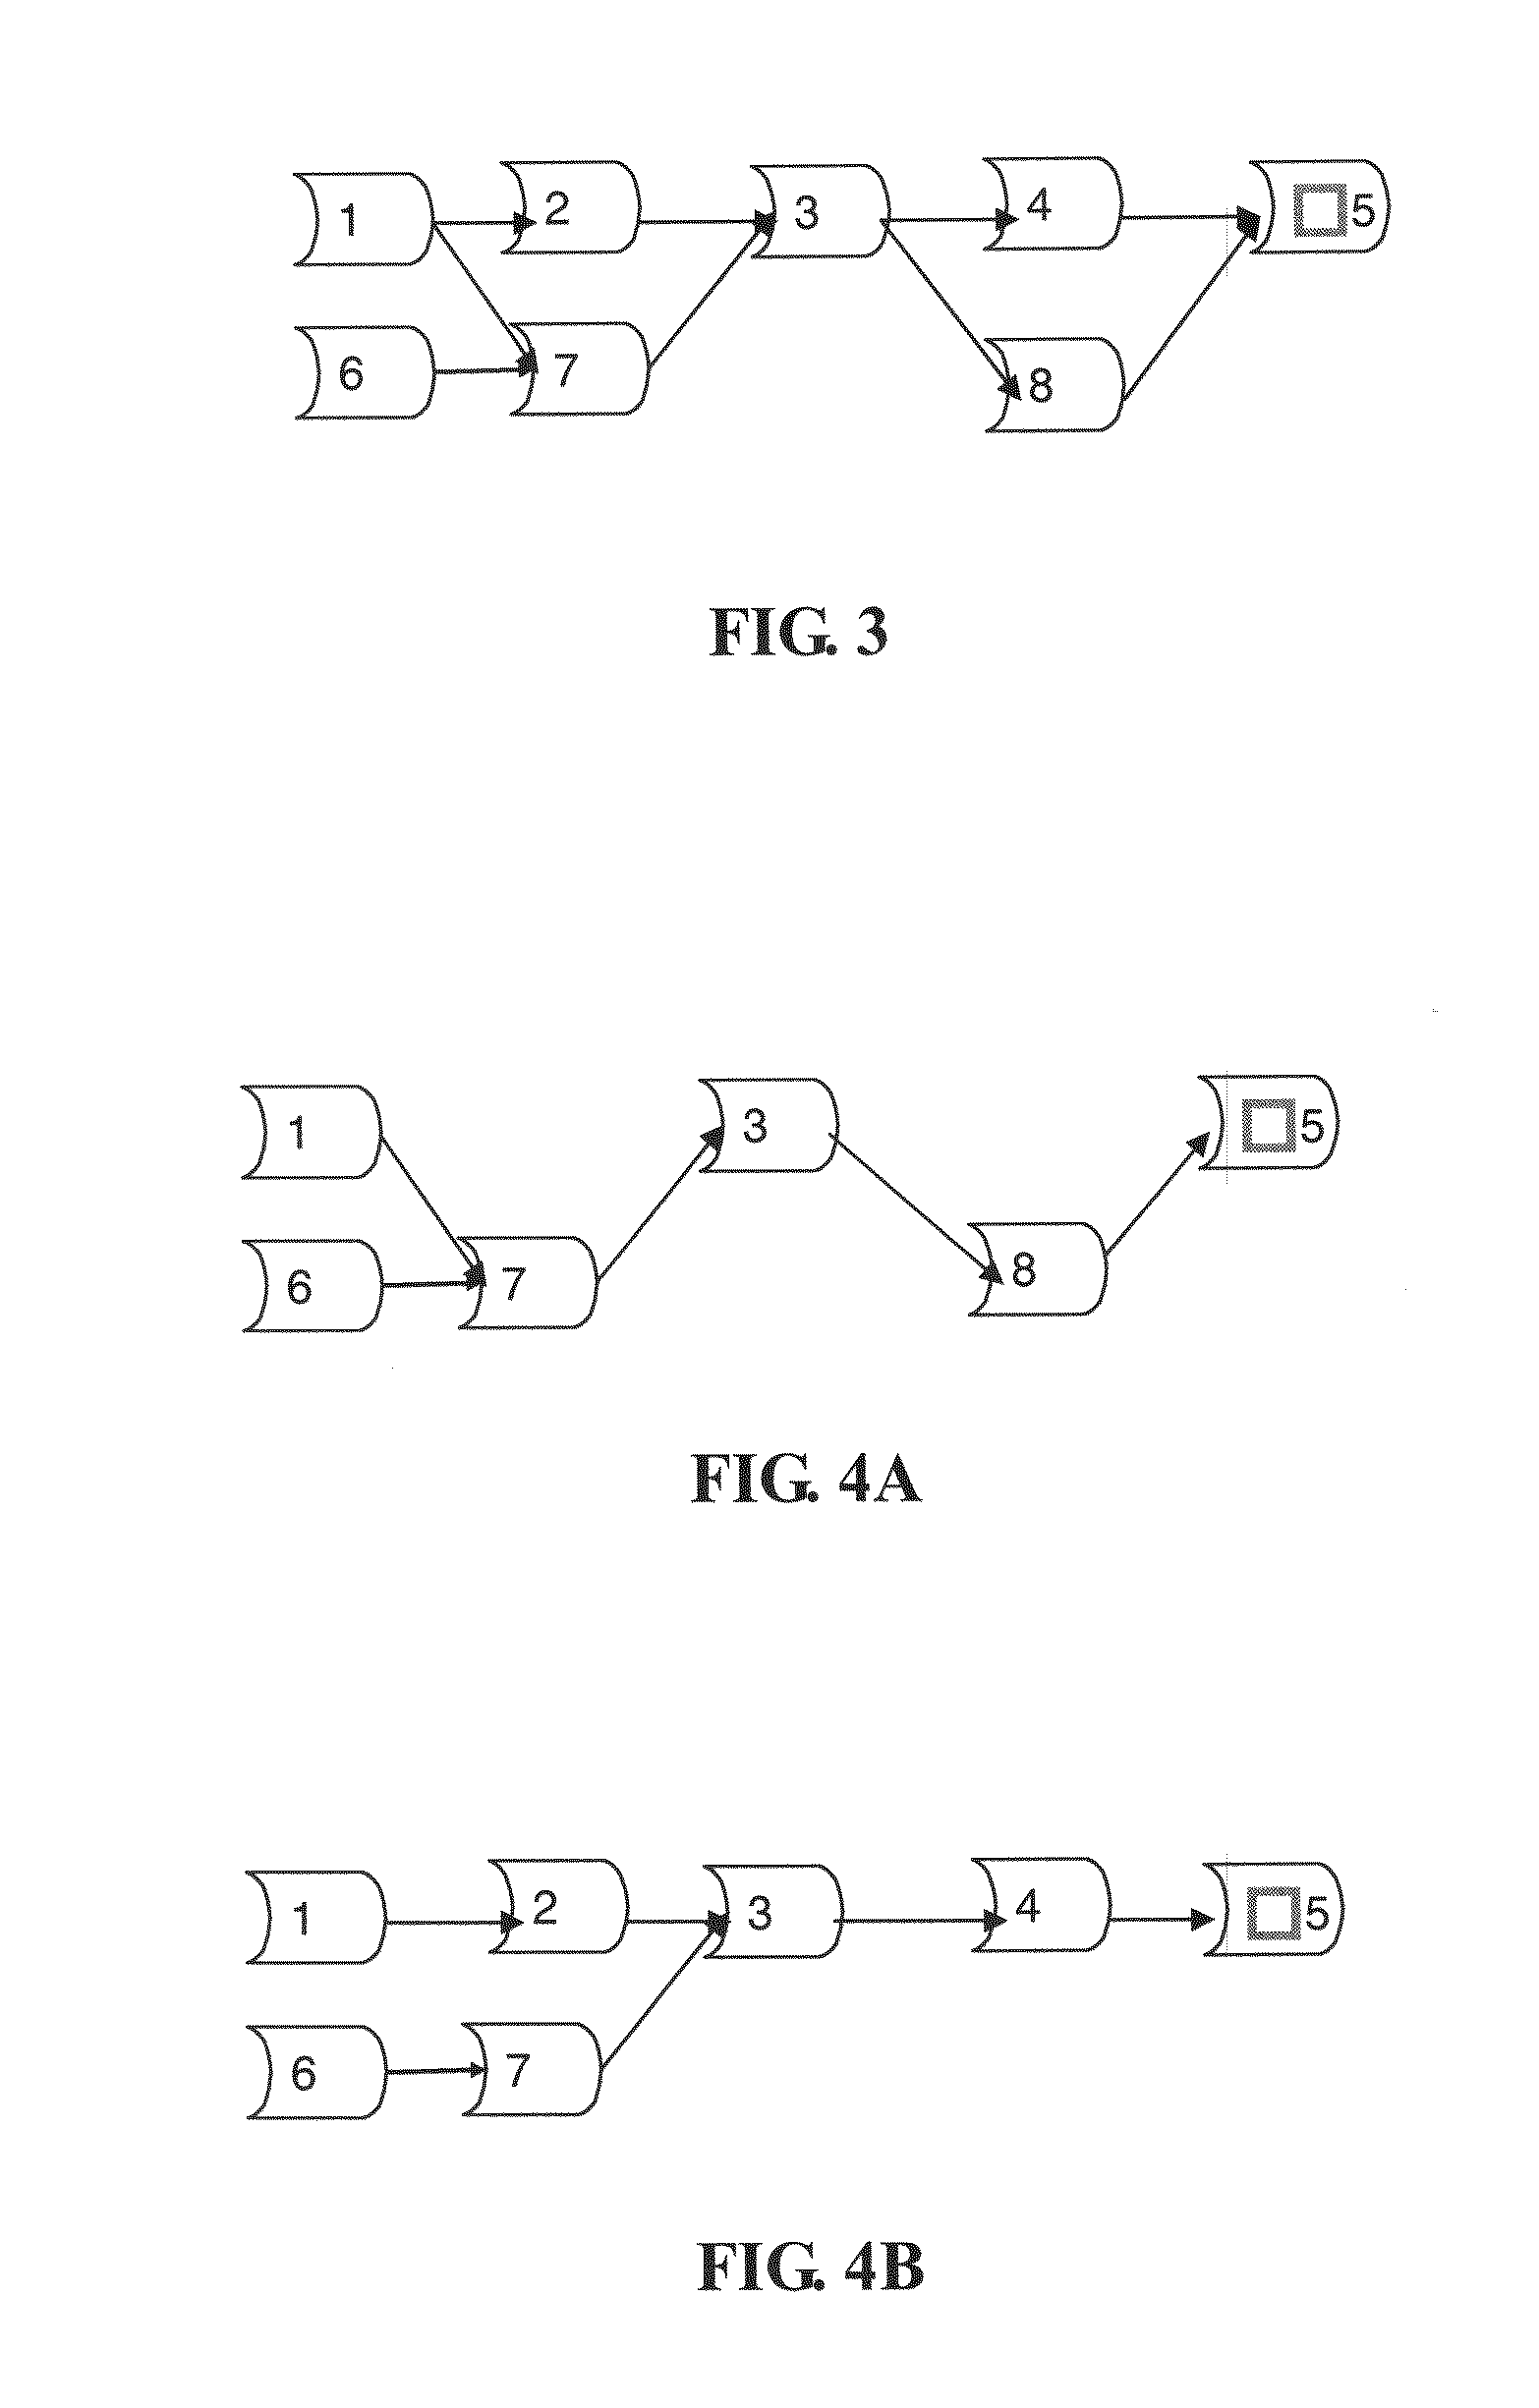 Method and system for loading status control of dll